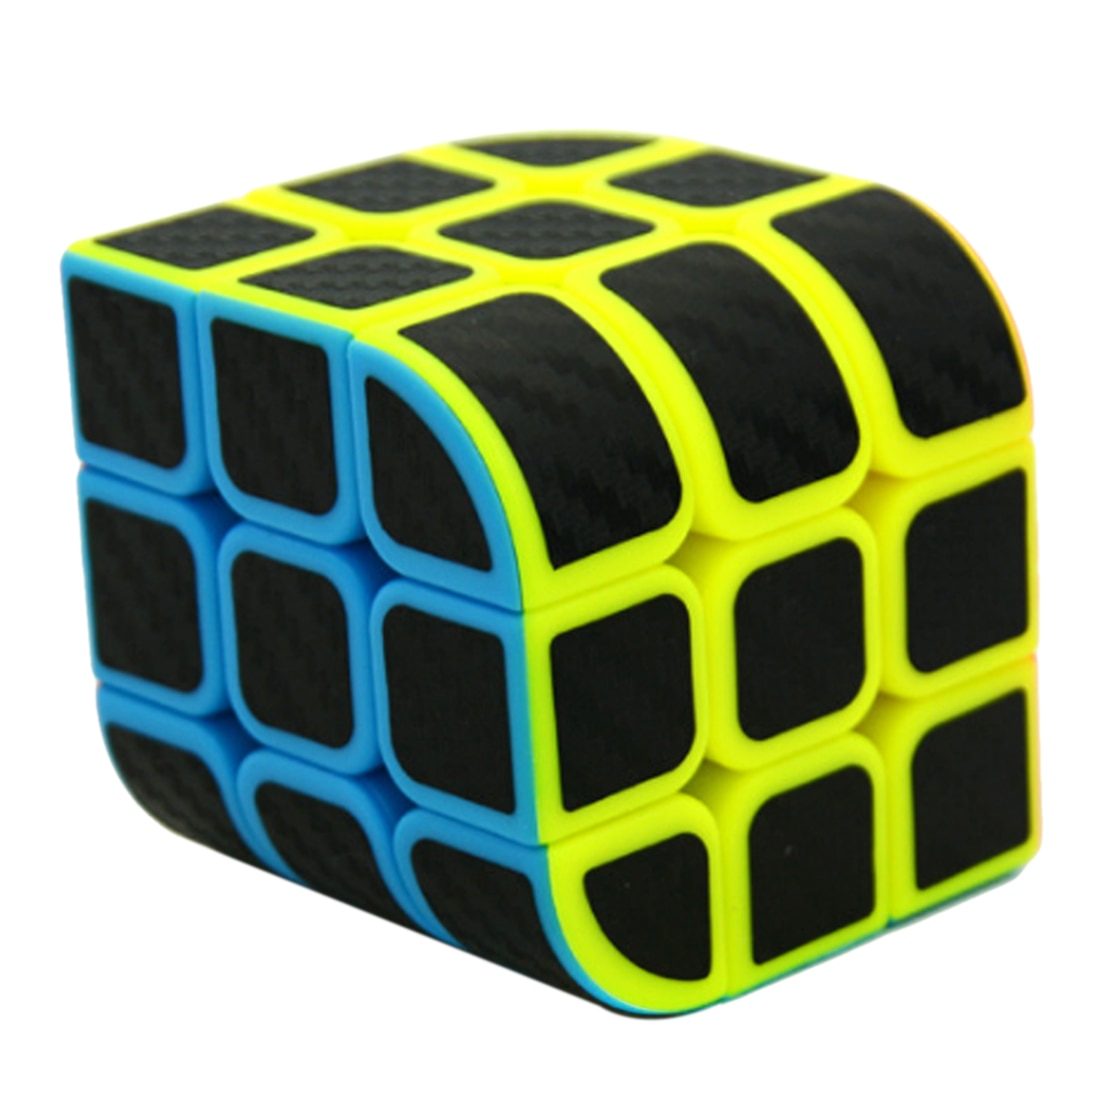 Lefang Trihedron Magic Cube Puzzle Toy with Carbon Fiber Sticker for Competition Challenge - Colorful